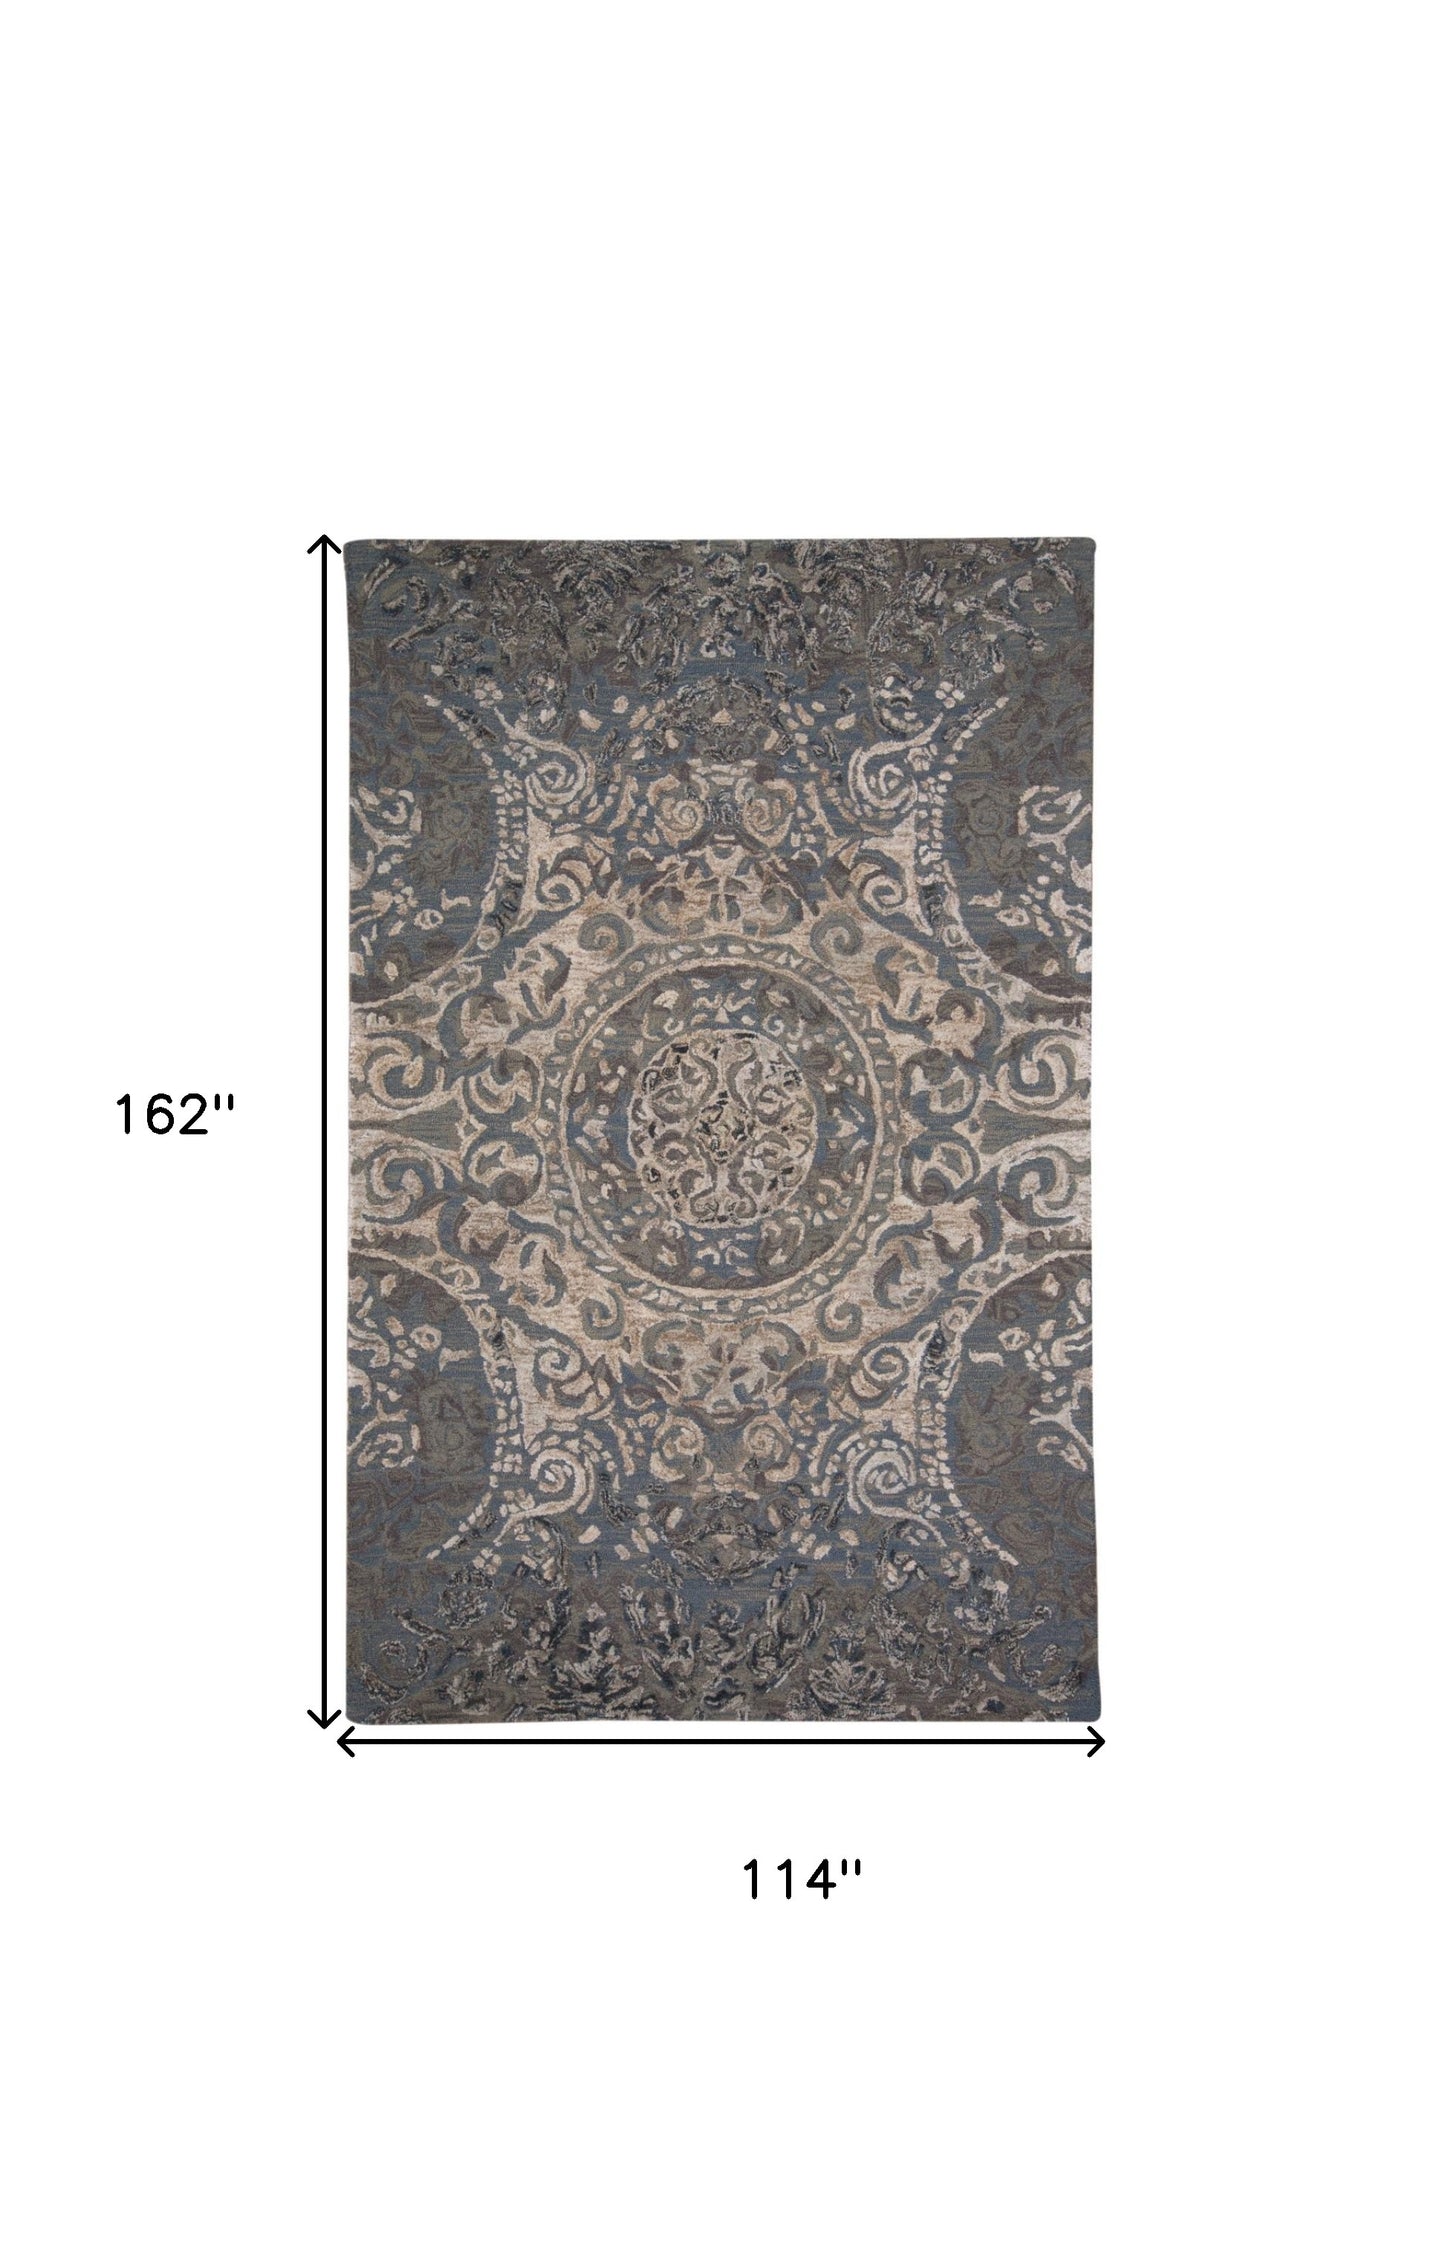 10' X 13' Gray Blue And Taupe Wool Abstract Tufted Handmade Stain Resistant Area Rug